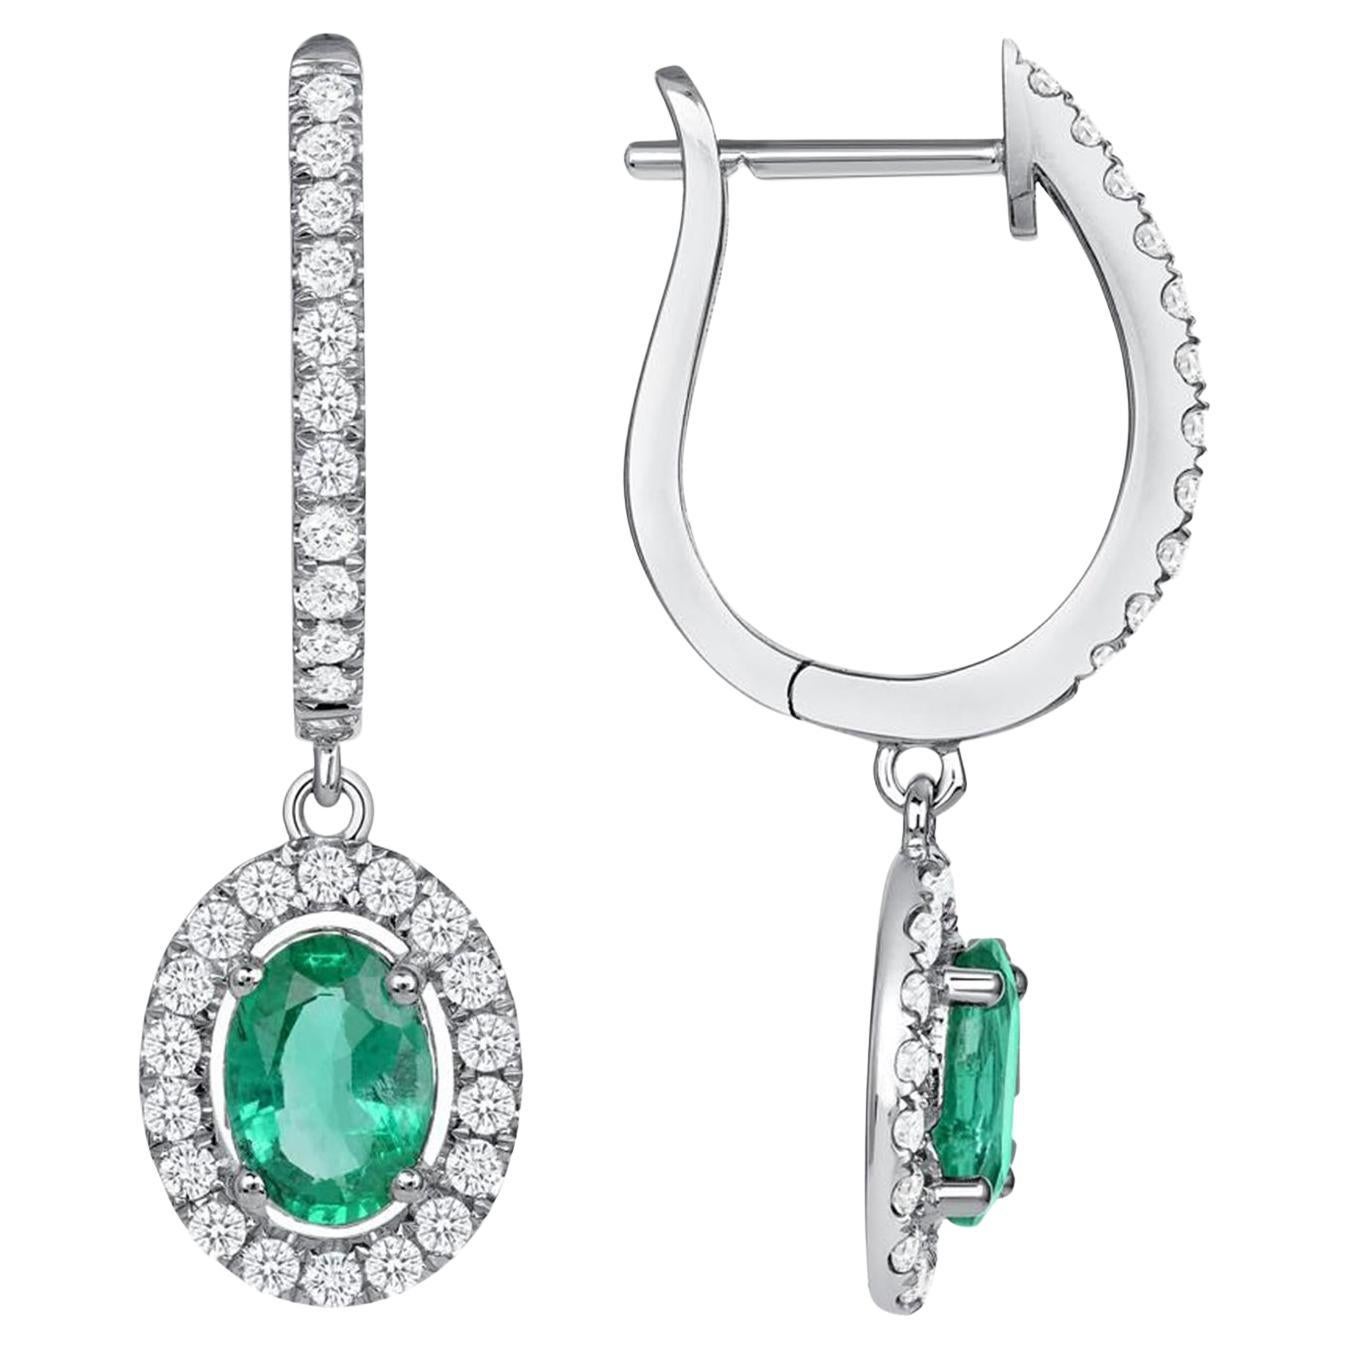 1.22 CT Natural Colombian Emerald 0.59 CT Diamonds 14K White Gold Drop Earrings